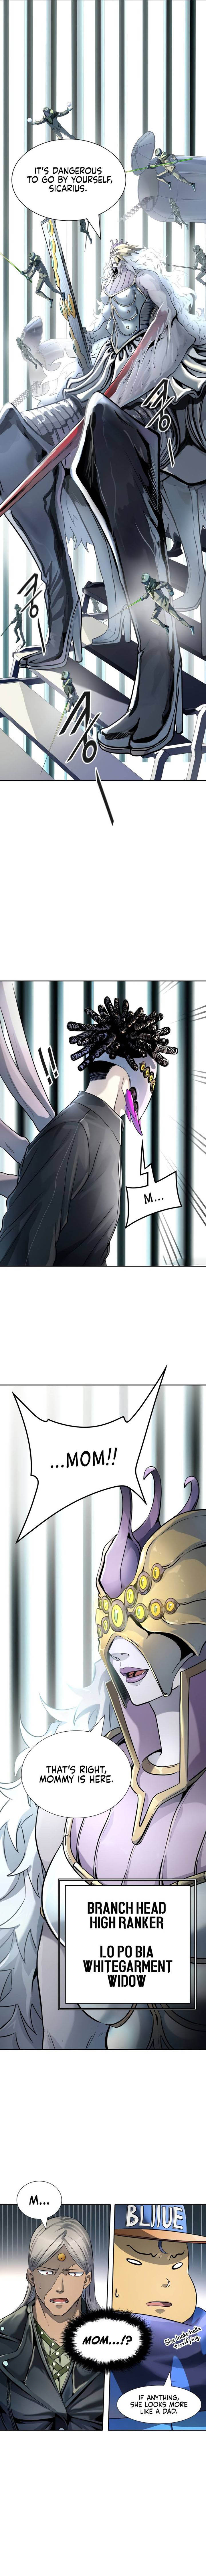 Tower Of God Chapter 518 Page 11